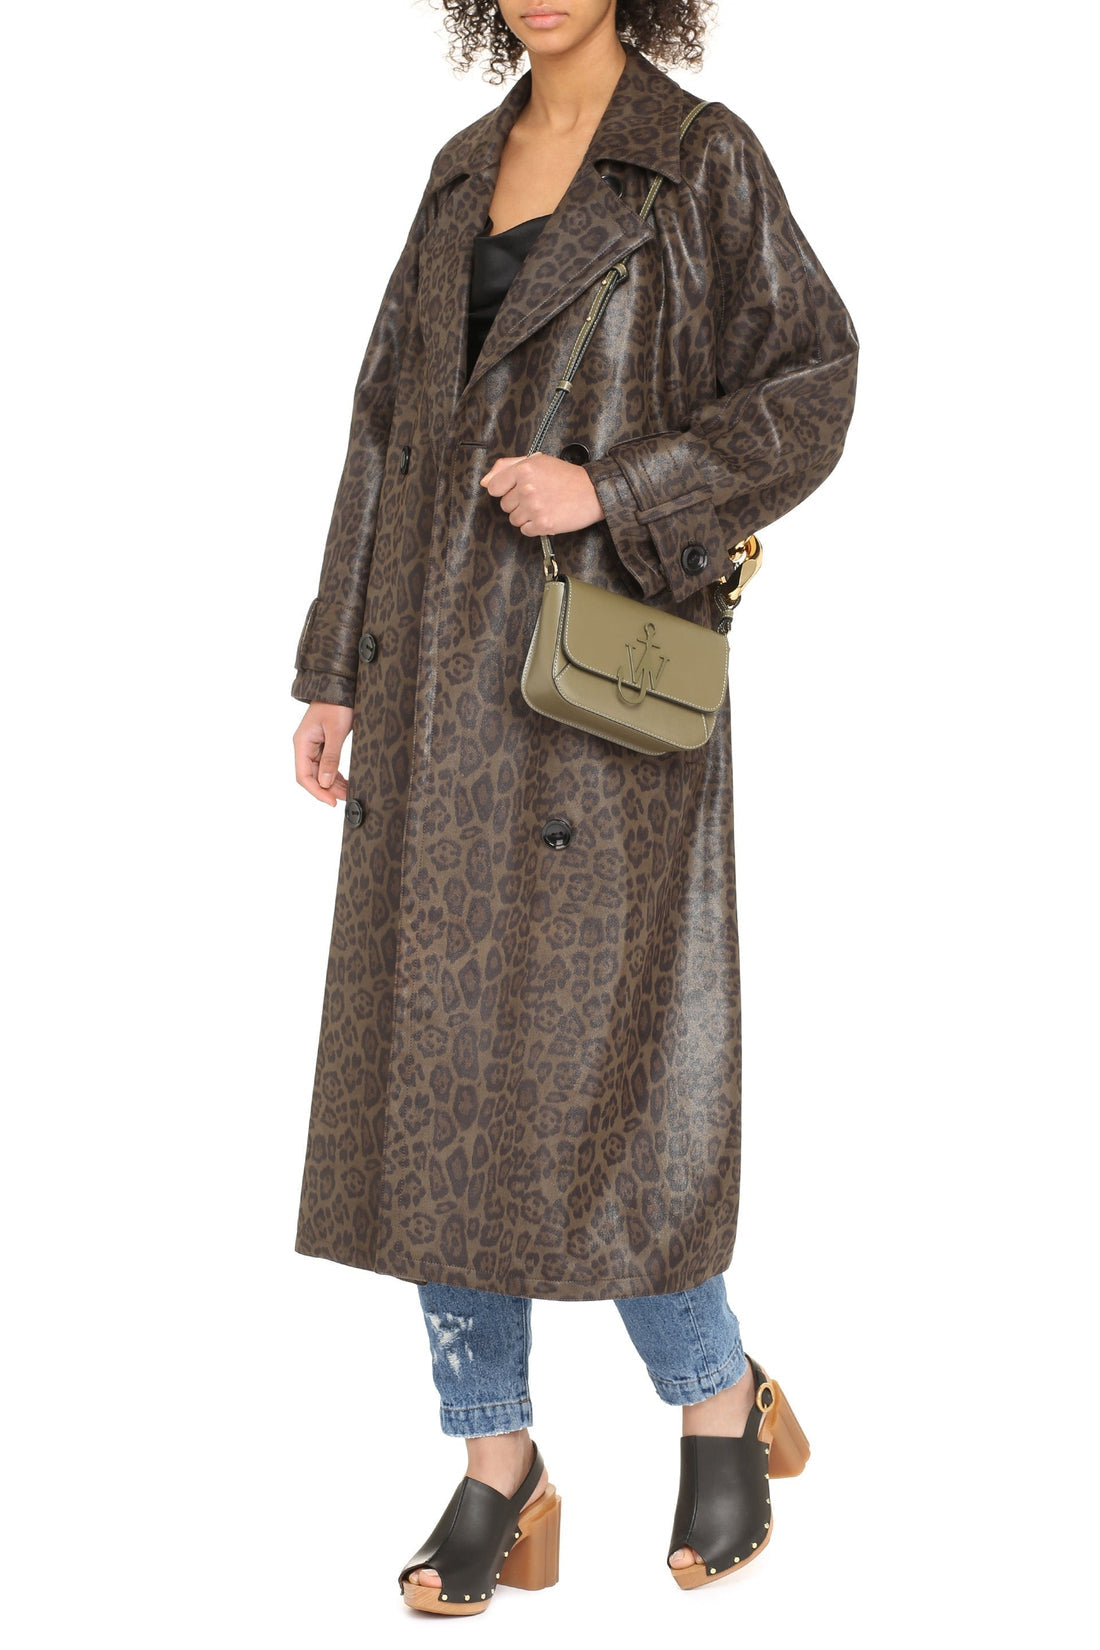 Stand Studio-OUTLET-SALE-Shelby double-breasted trench coat-ARCHIVIST